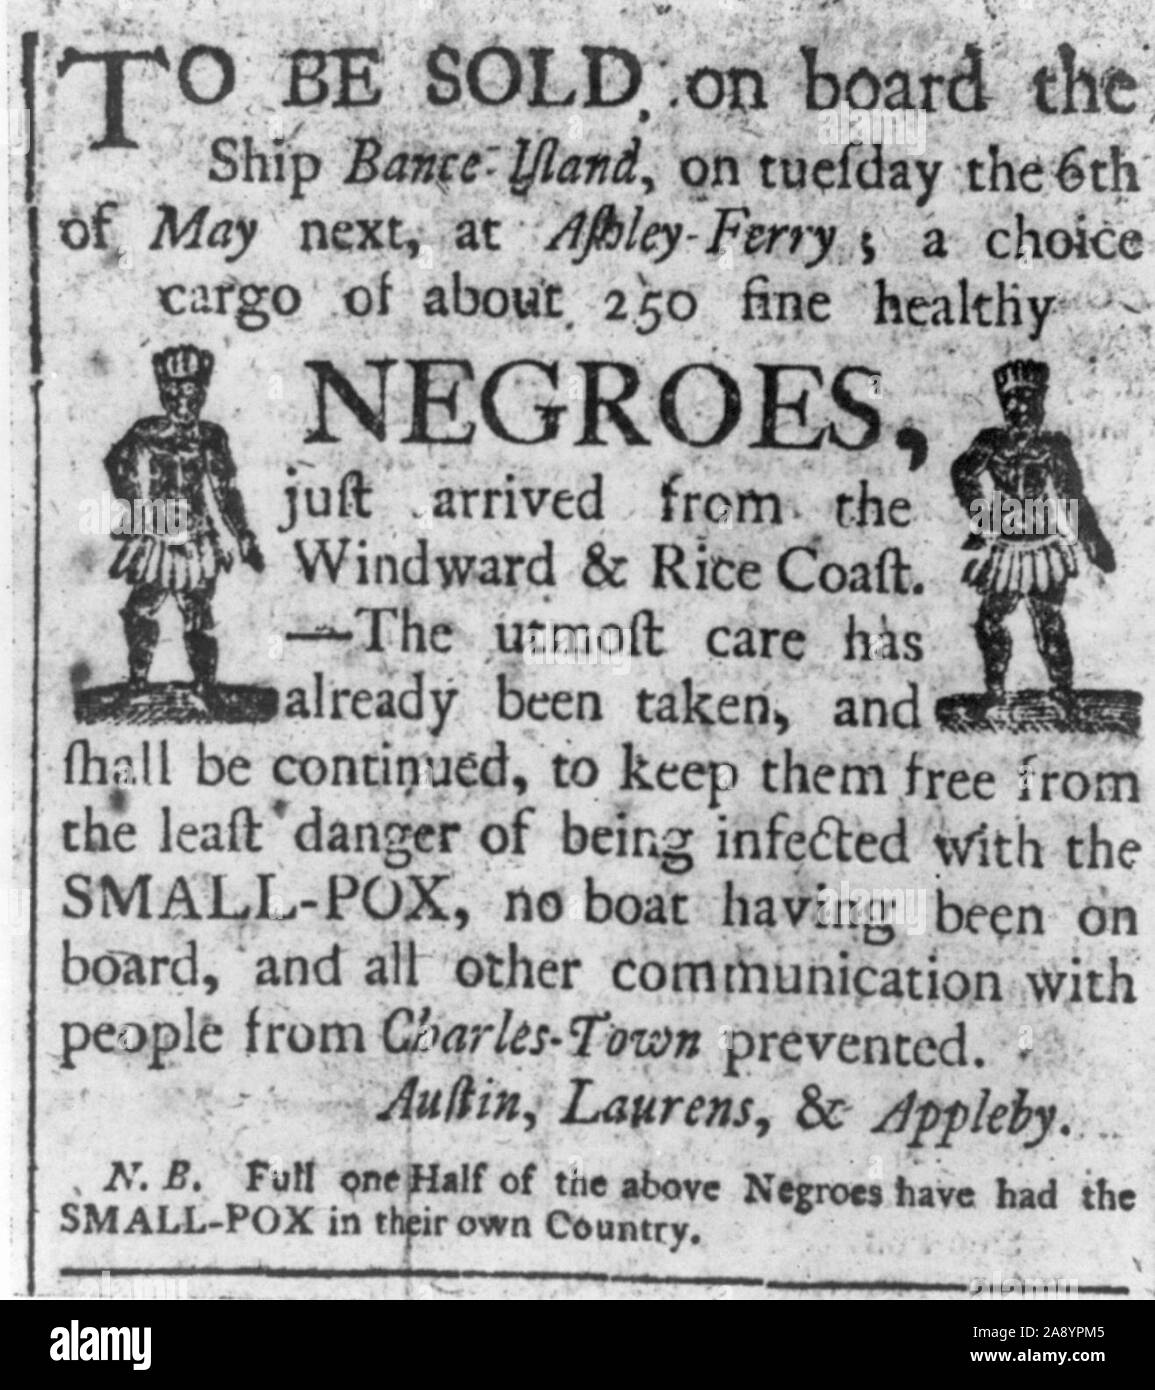 To be sold, on board the ship Bance Island, ... negroes, just arrived from the Windward & Rice Coast - newspaper advertisement from the 1780s(?) for the sale of slaves at Ashley Ferry outside of Charleston, South Carolina Stock Photo